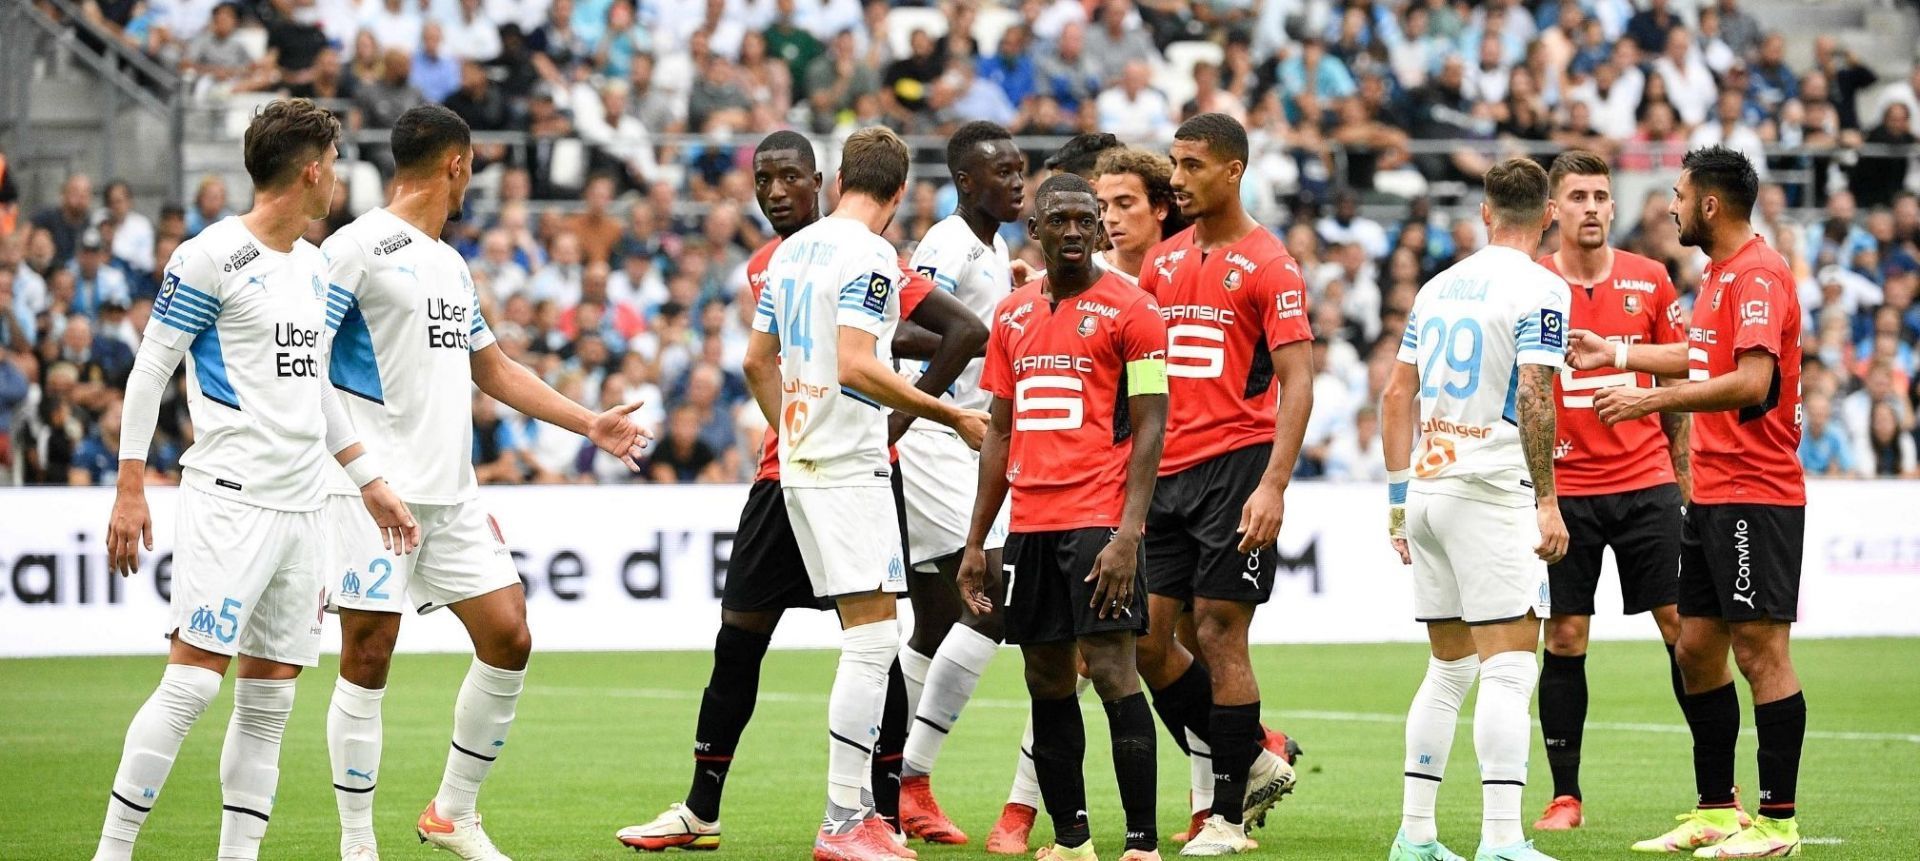 Marseille and Rennes go head-to-head in Ligue 1 on Sunday